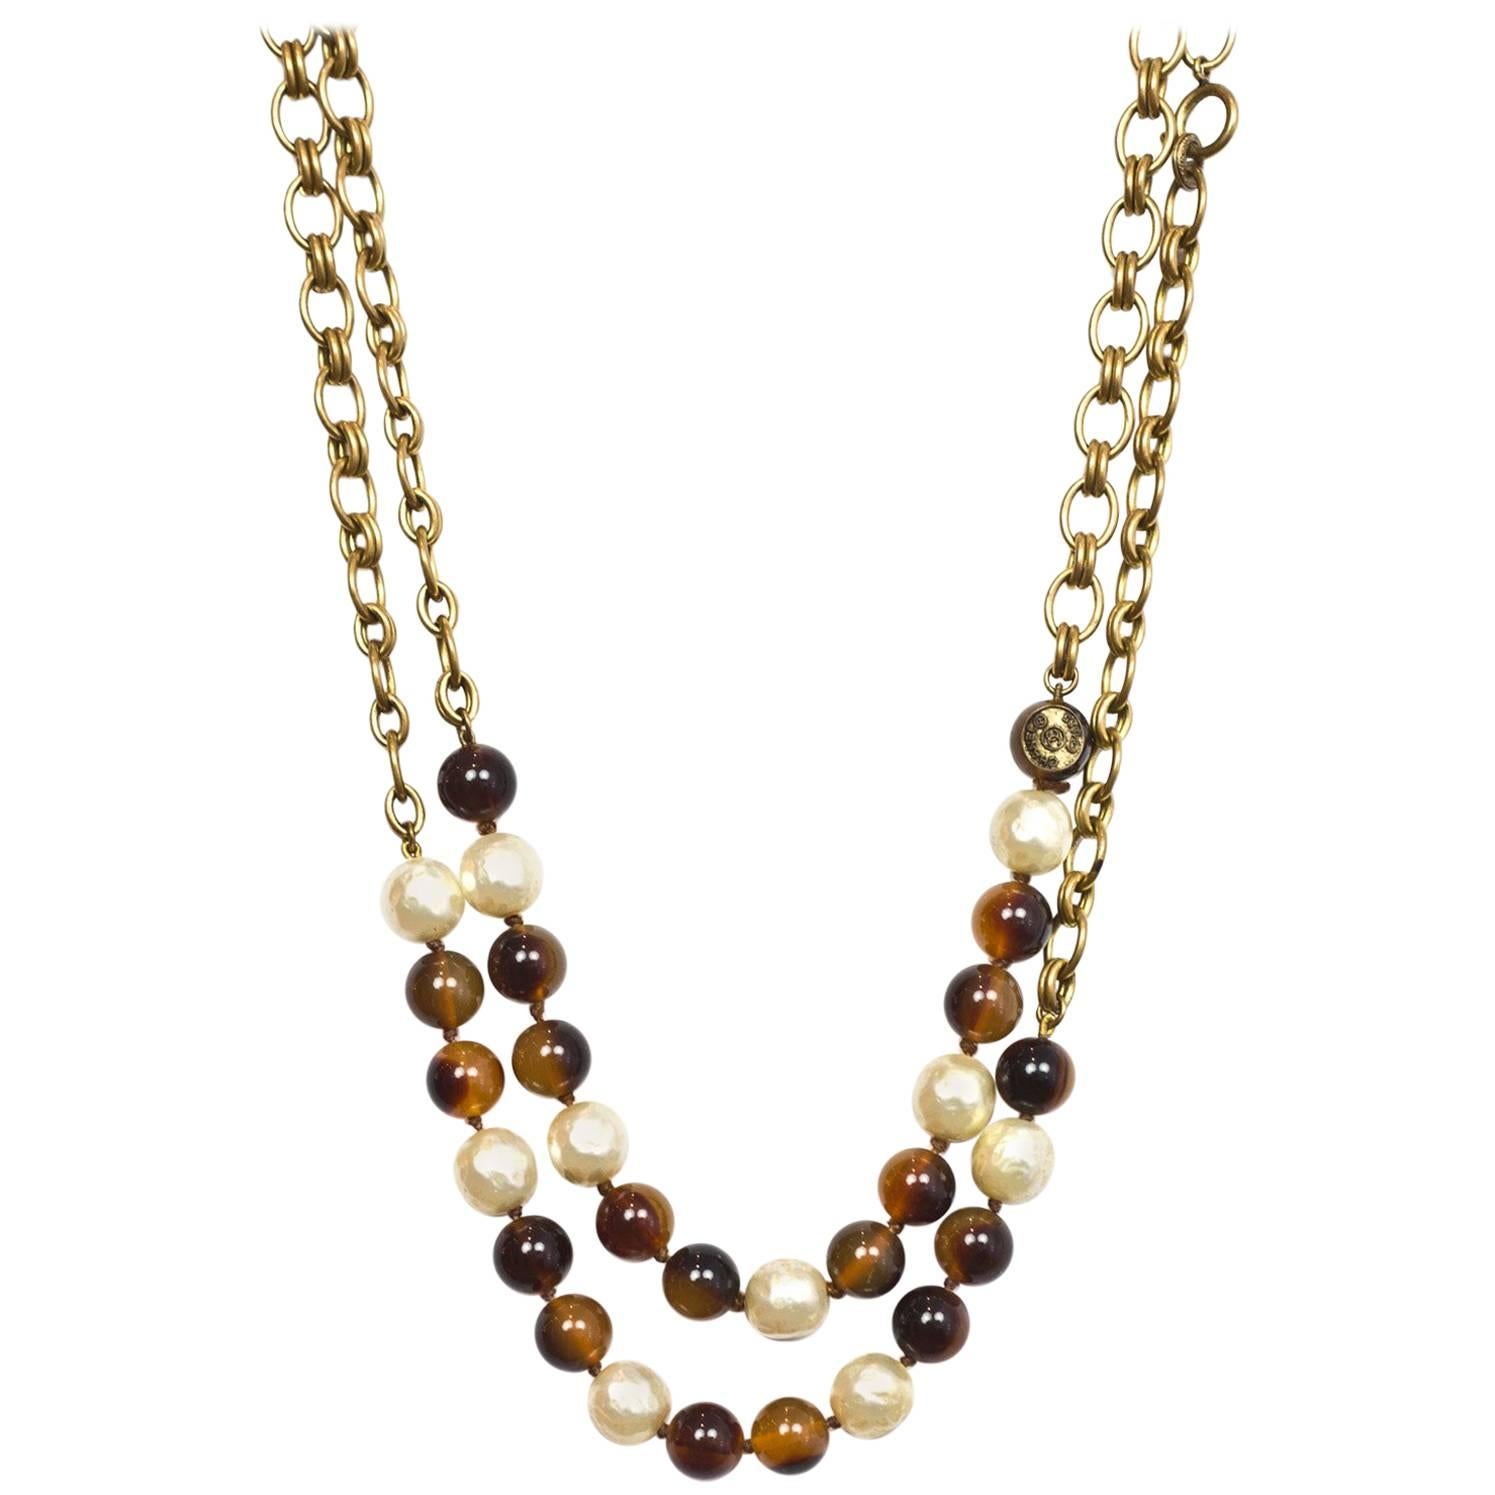 Chanel Vintage '80s Beaded and Faux Pearl Two-Strand Necklace